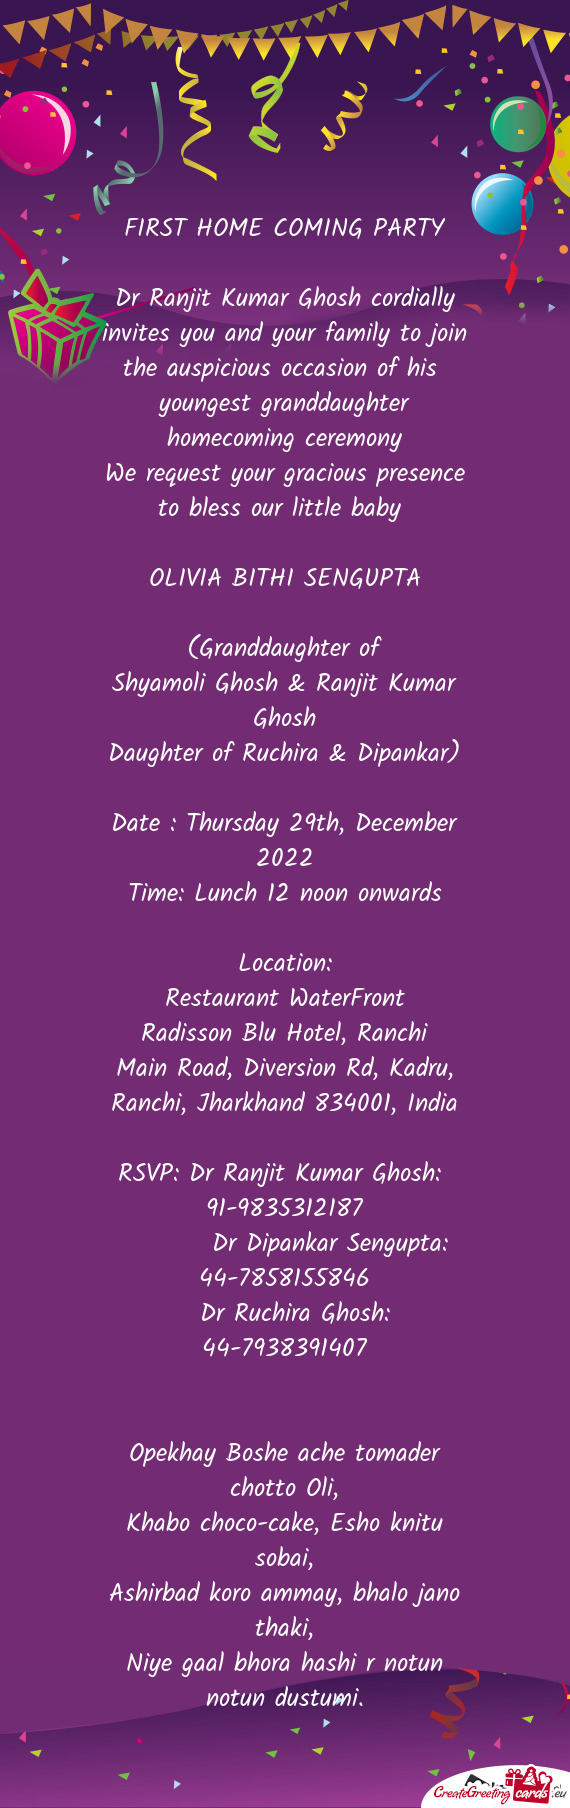 Dr Ranjit Kumar Ghosh cordially invites you and your family to join the auspicious occasion of his